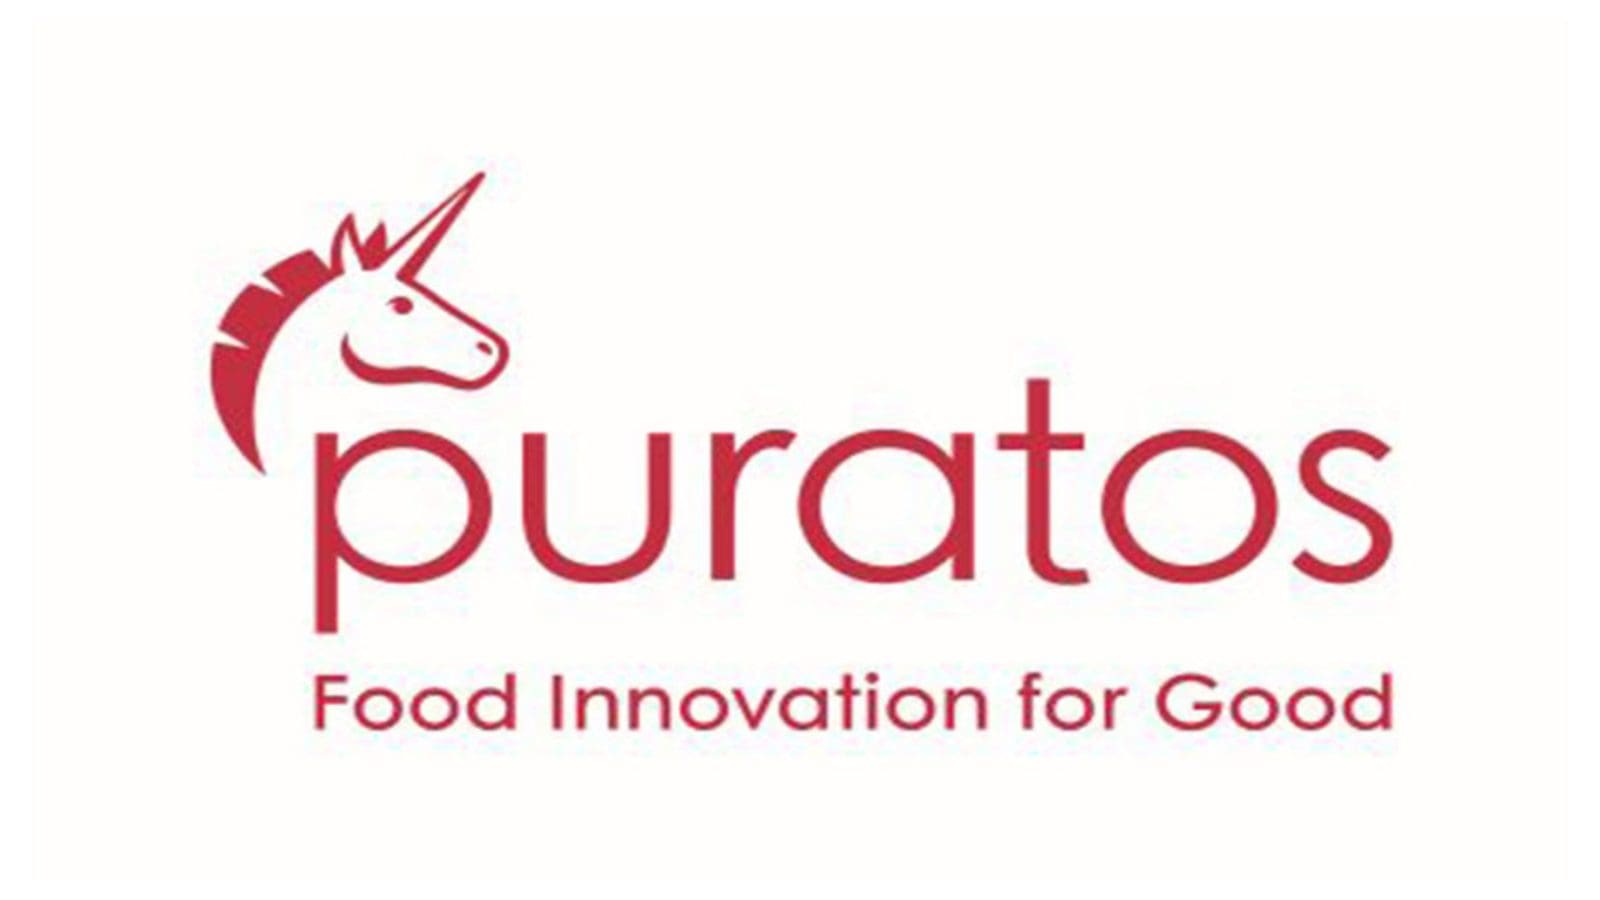 Puratos refreshes visual identity to reflect ambition to enhance positive global impact   